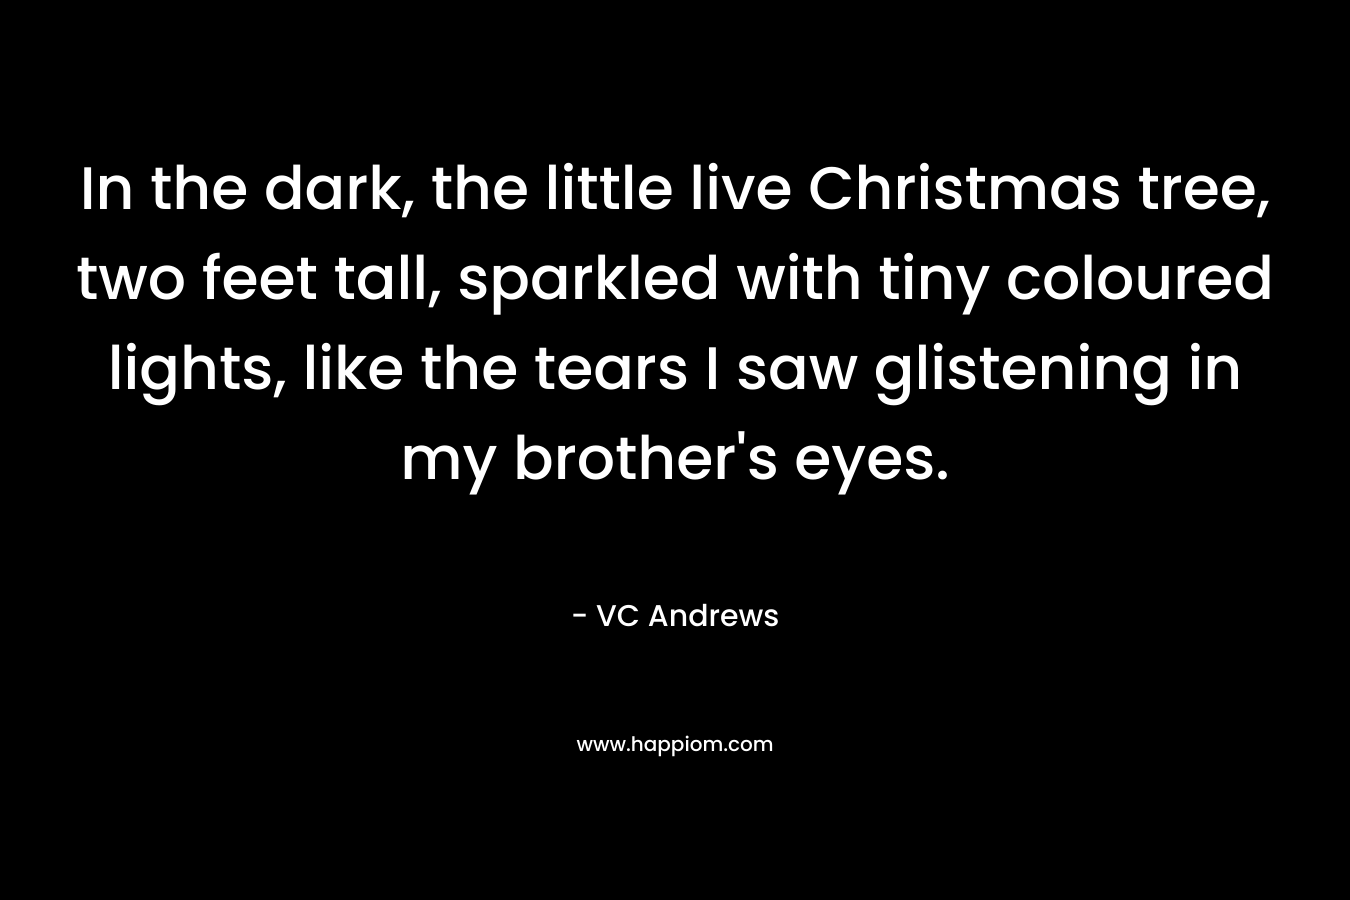 In the dark, the little live Christmas tree, two feet tall, sparkled with tiny coloured lights, like the tears I saw glistening in my brother’s eyes. – VC Andrews